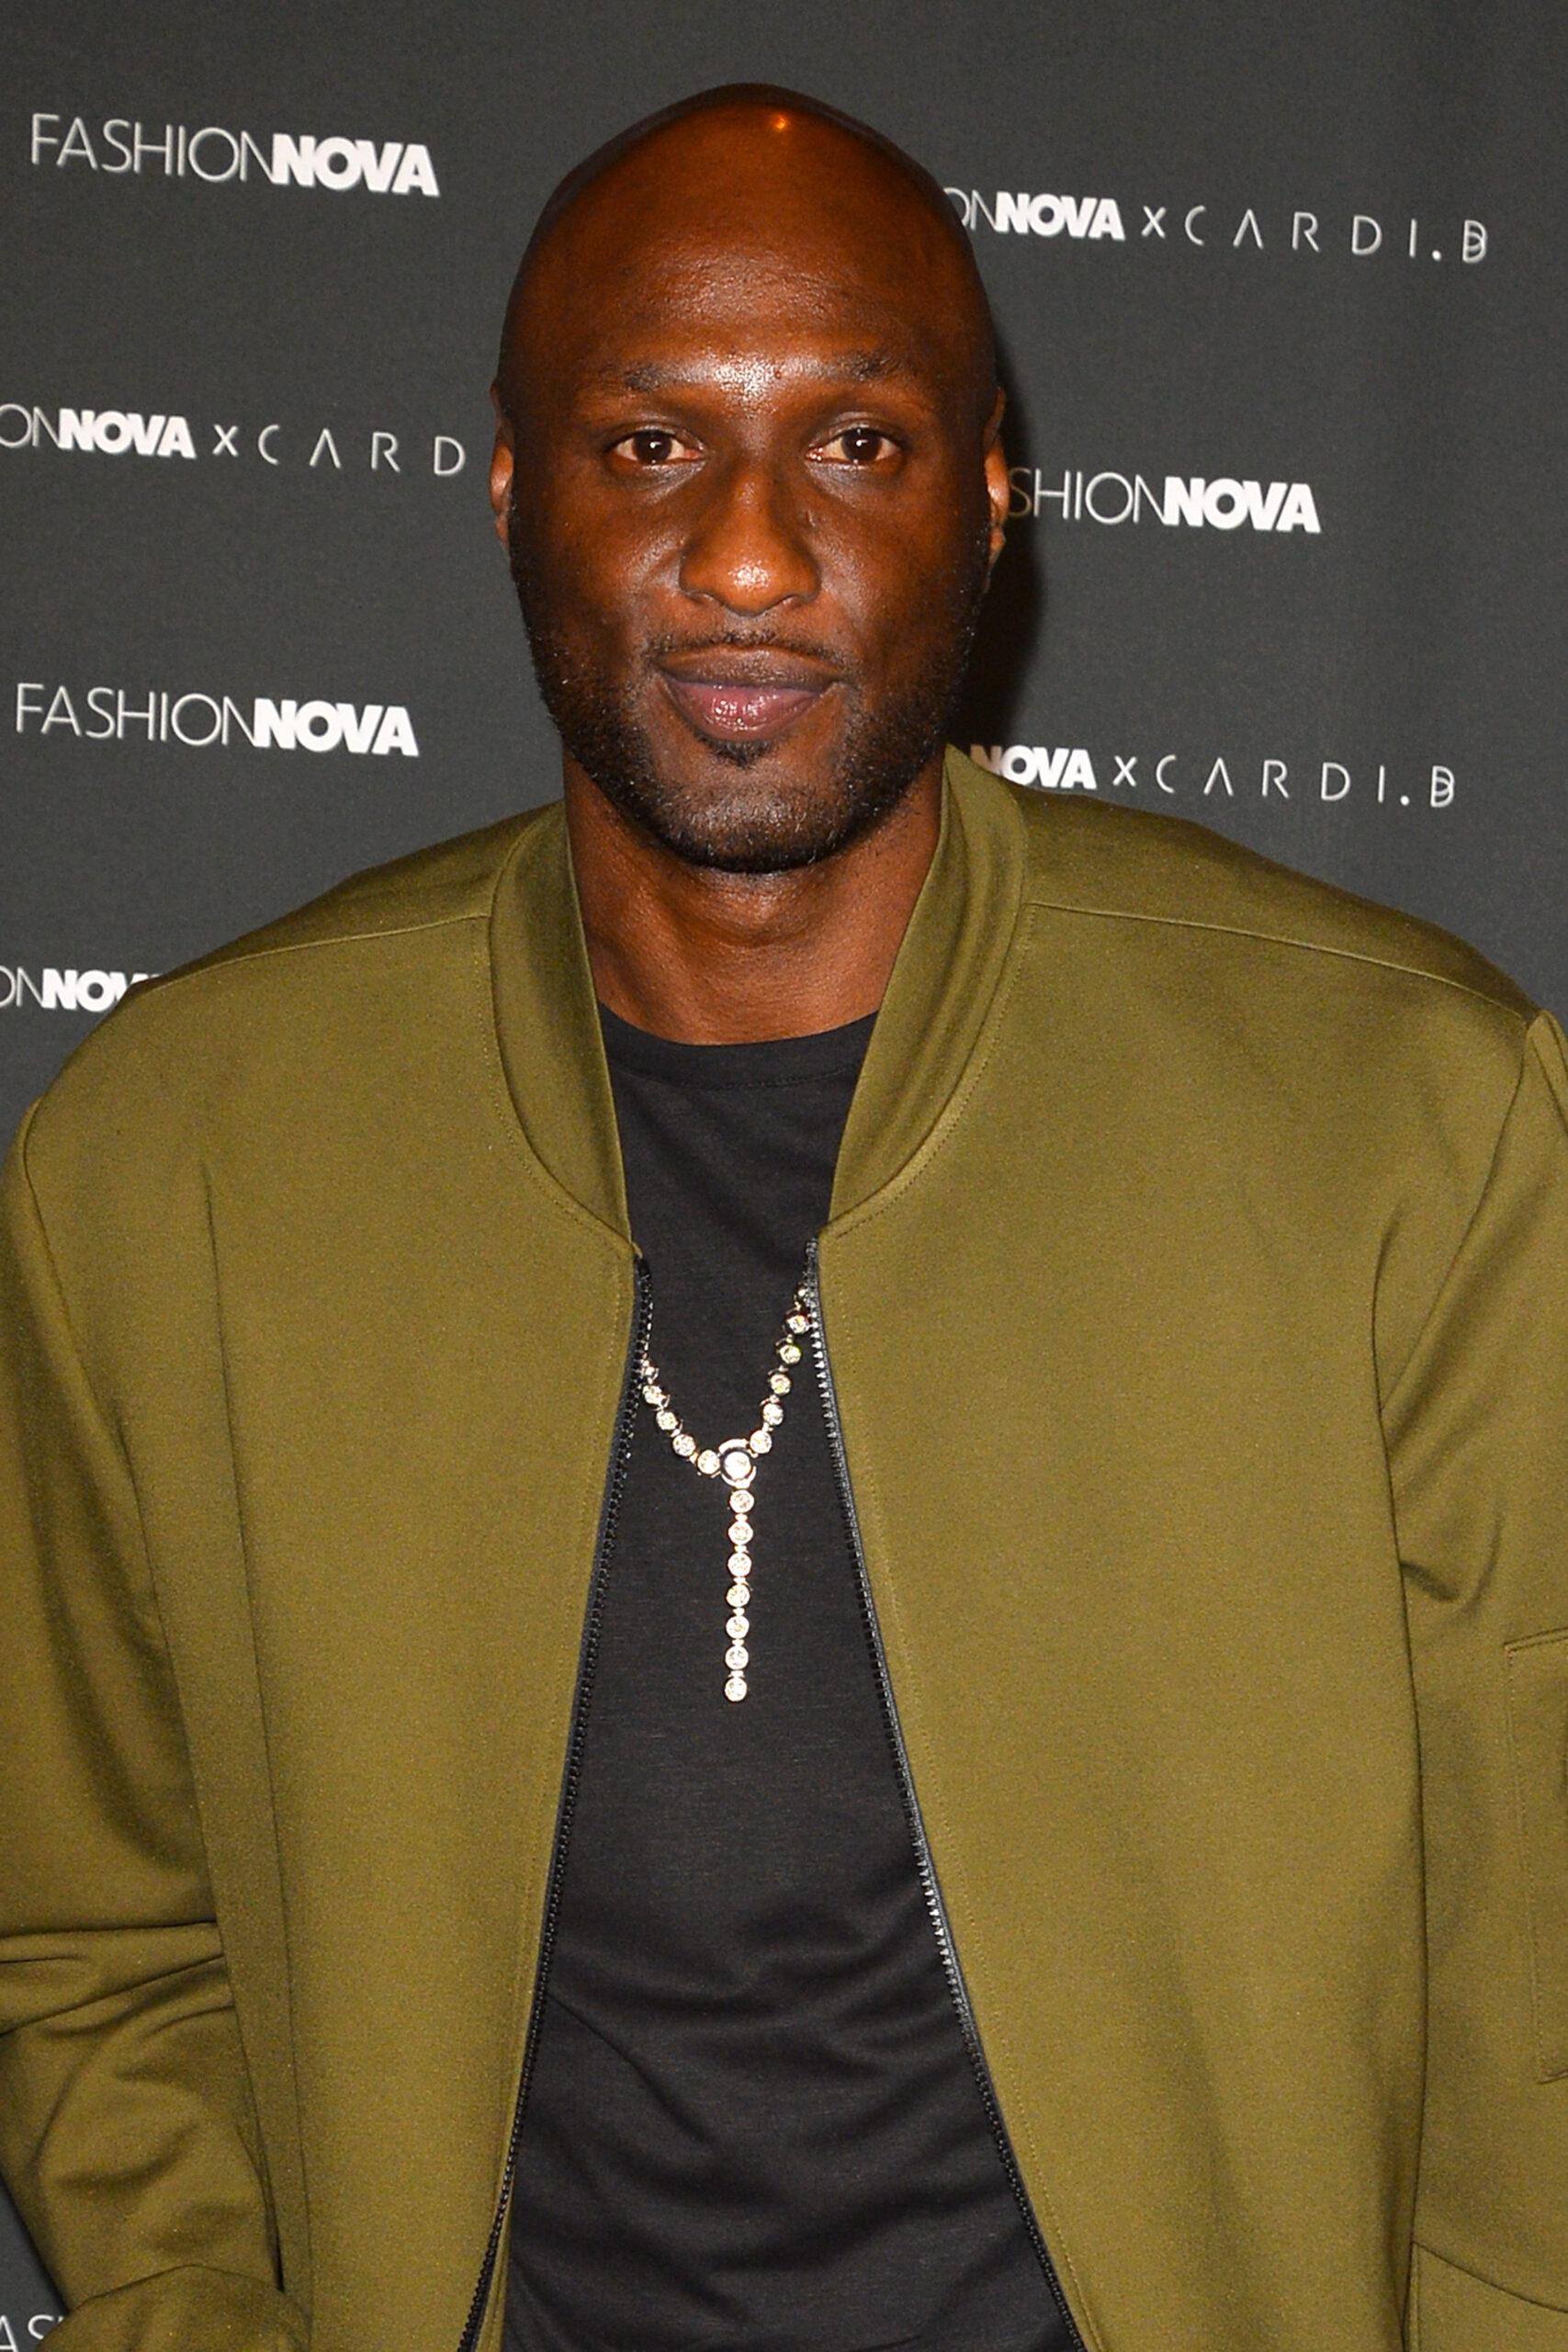 Lamar Odom Cancels Appearance Due To Exhaustion and Dehydration